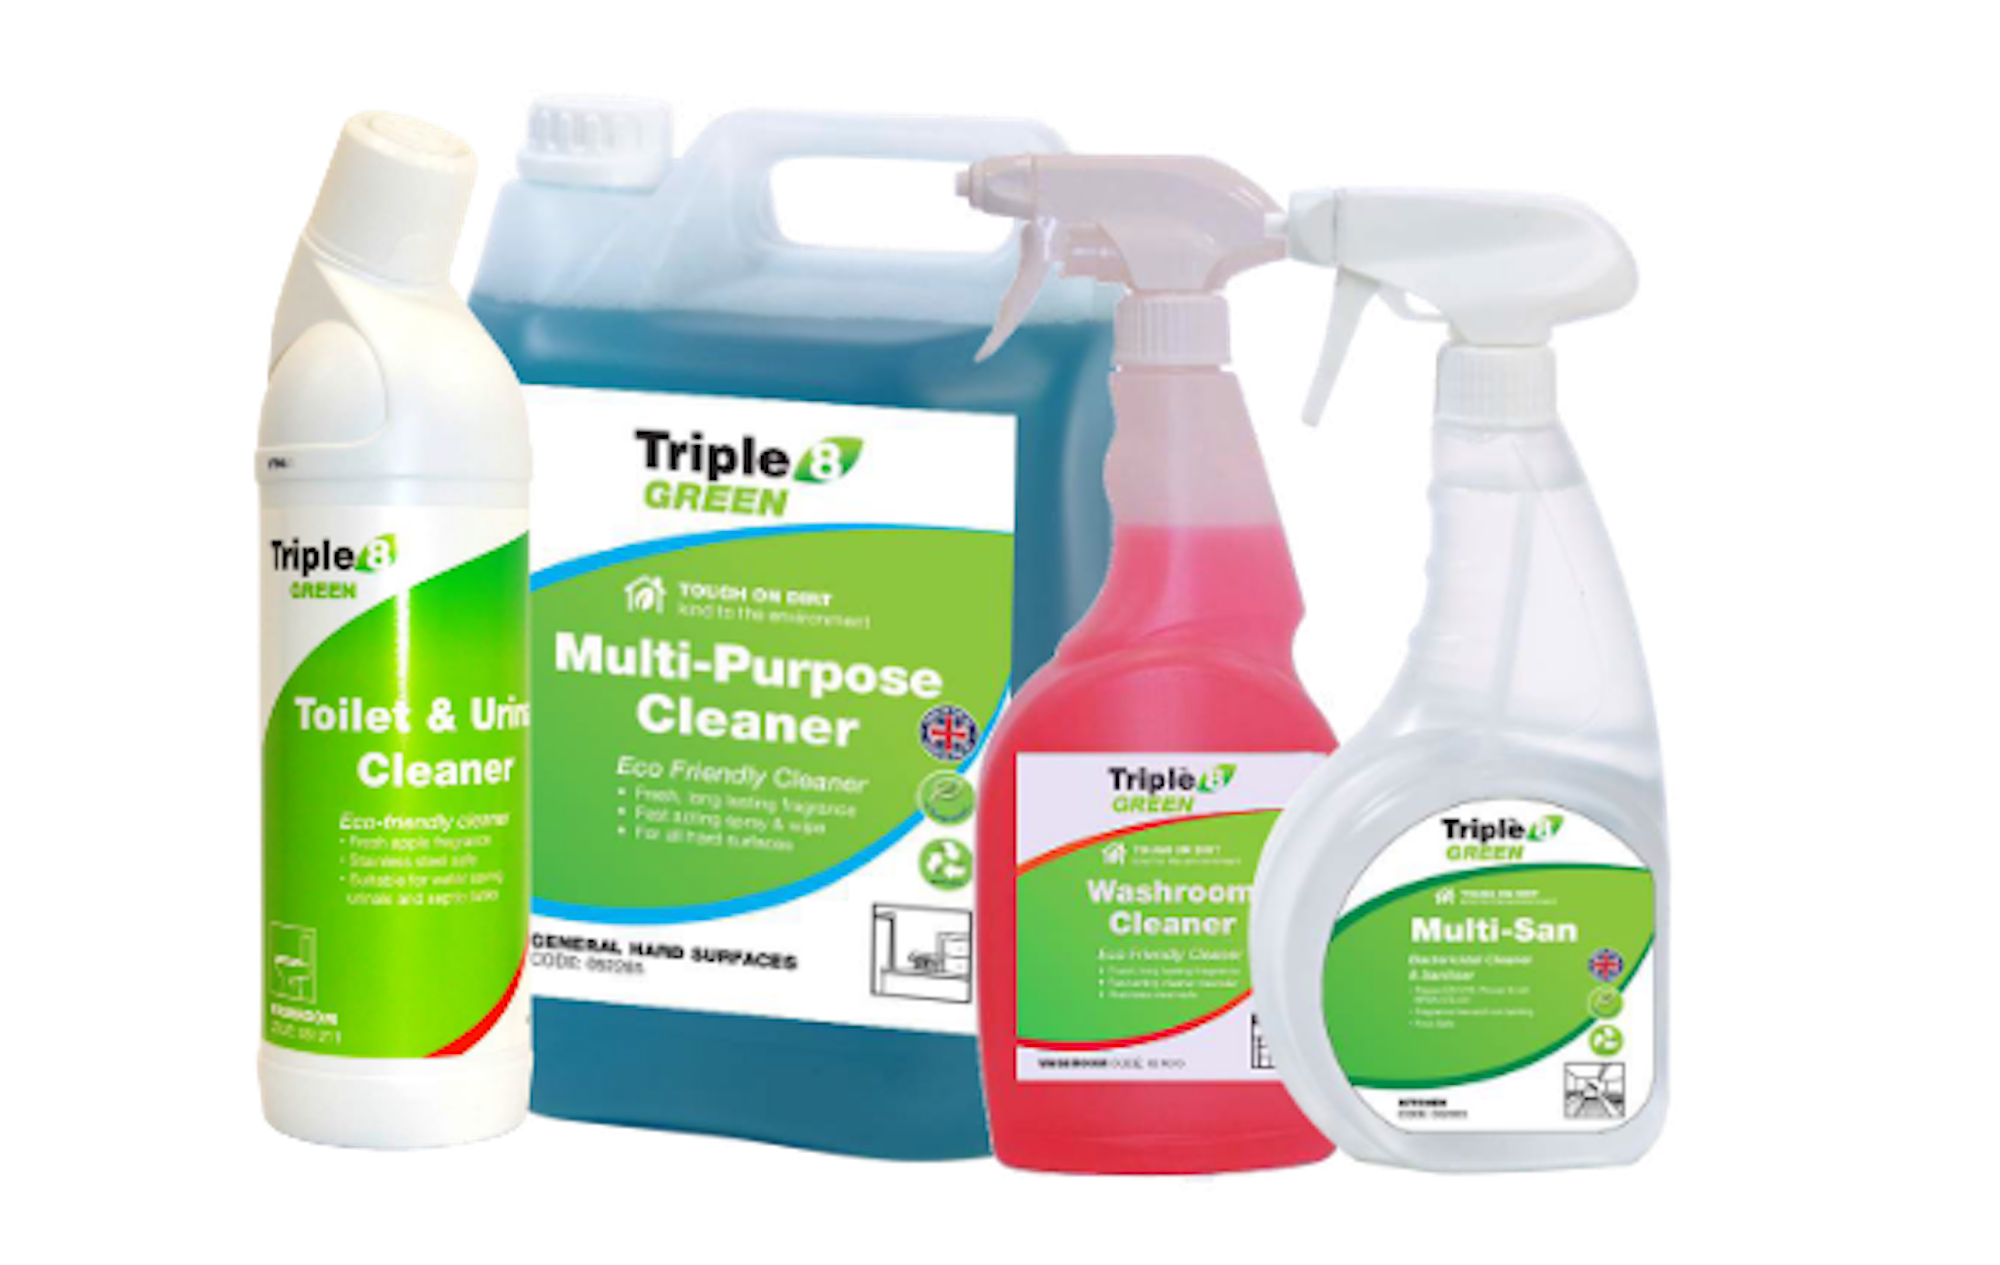 Triple 8 Products